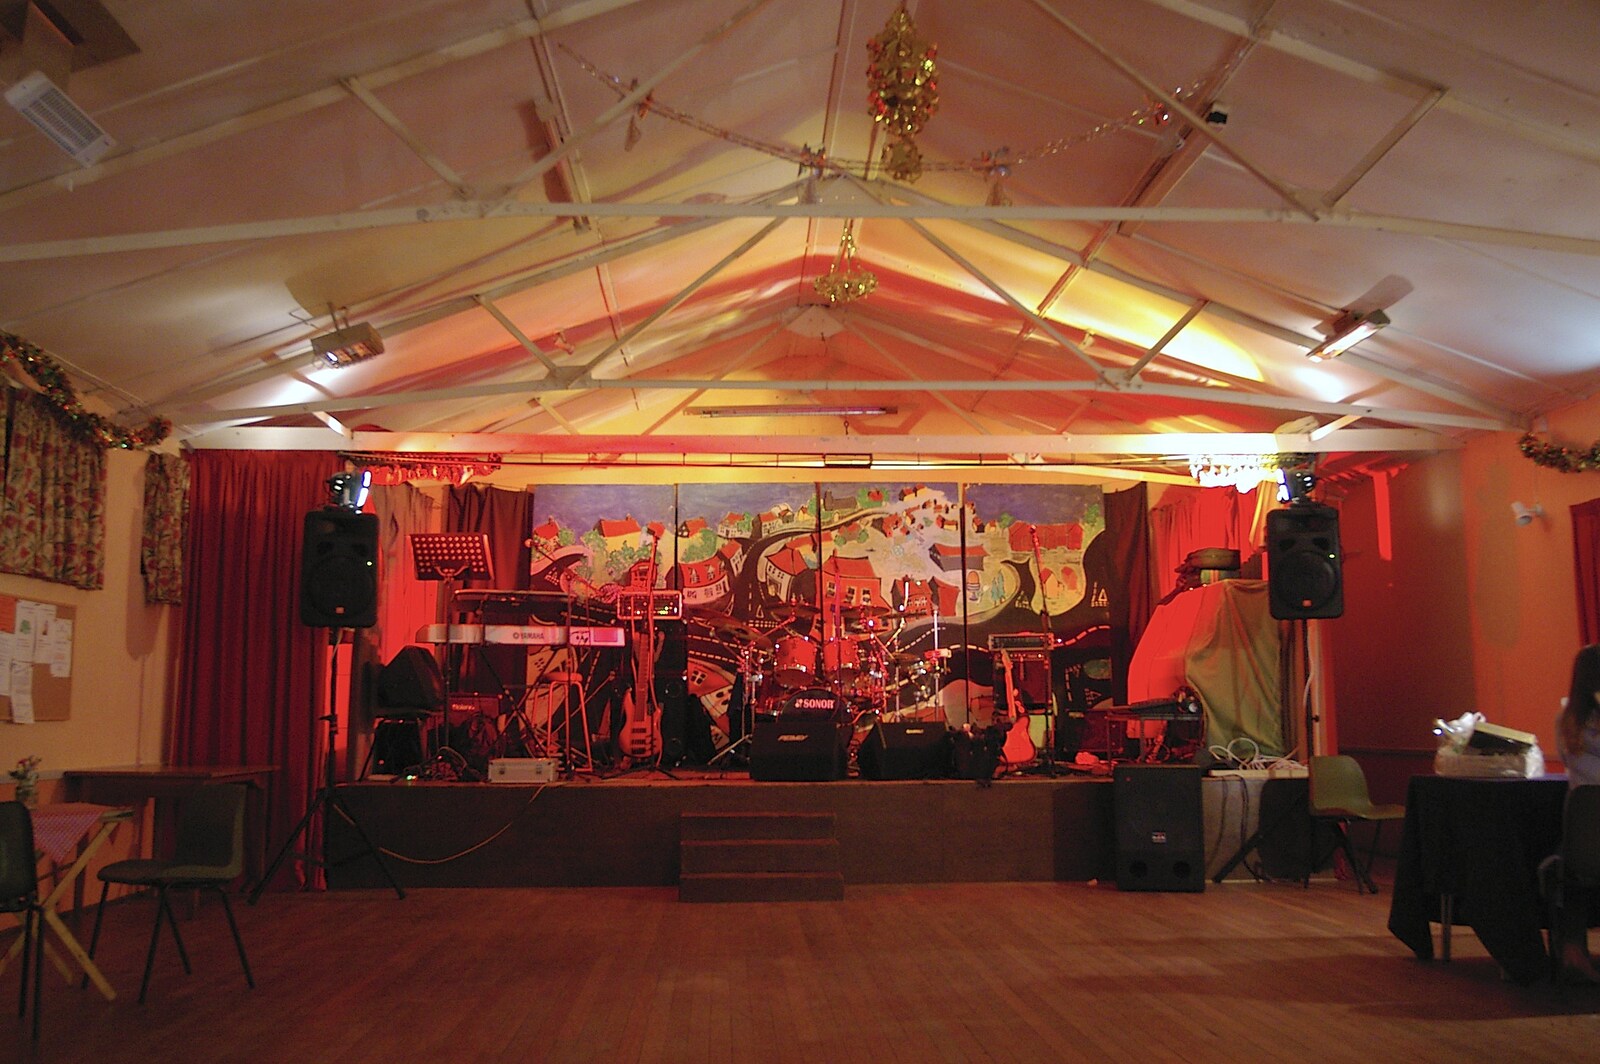 The stage is ready in Kenninghall Memorial Hall from The BBs' Rock'n'Roll Life, Kenninghall, Norfolk - 2nd December 2005